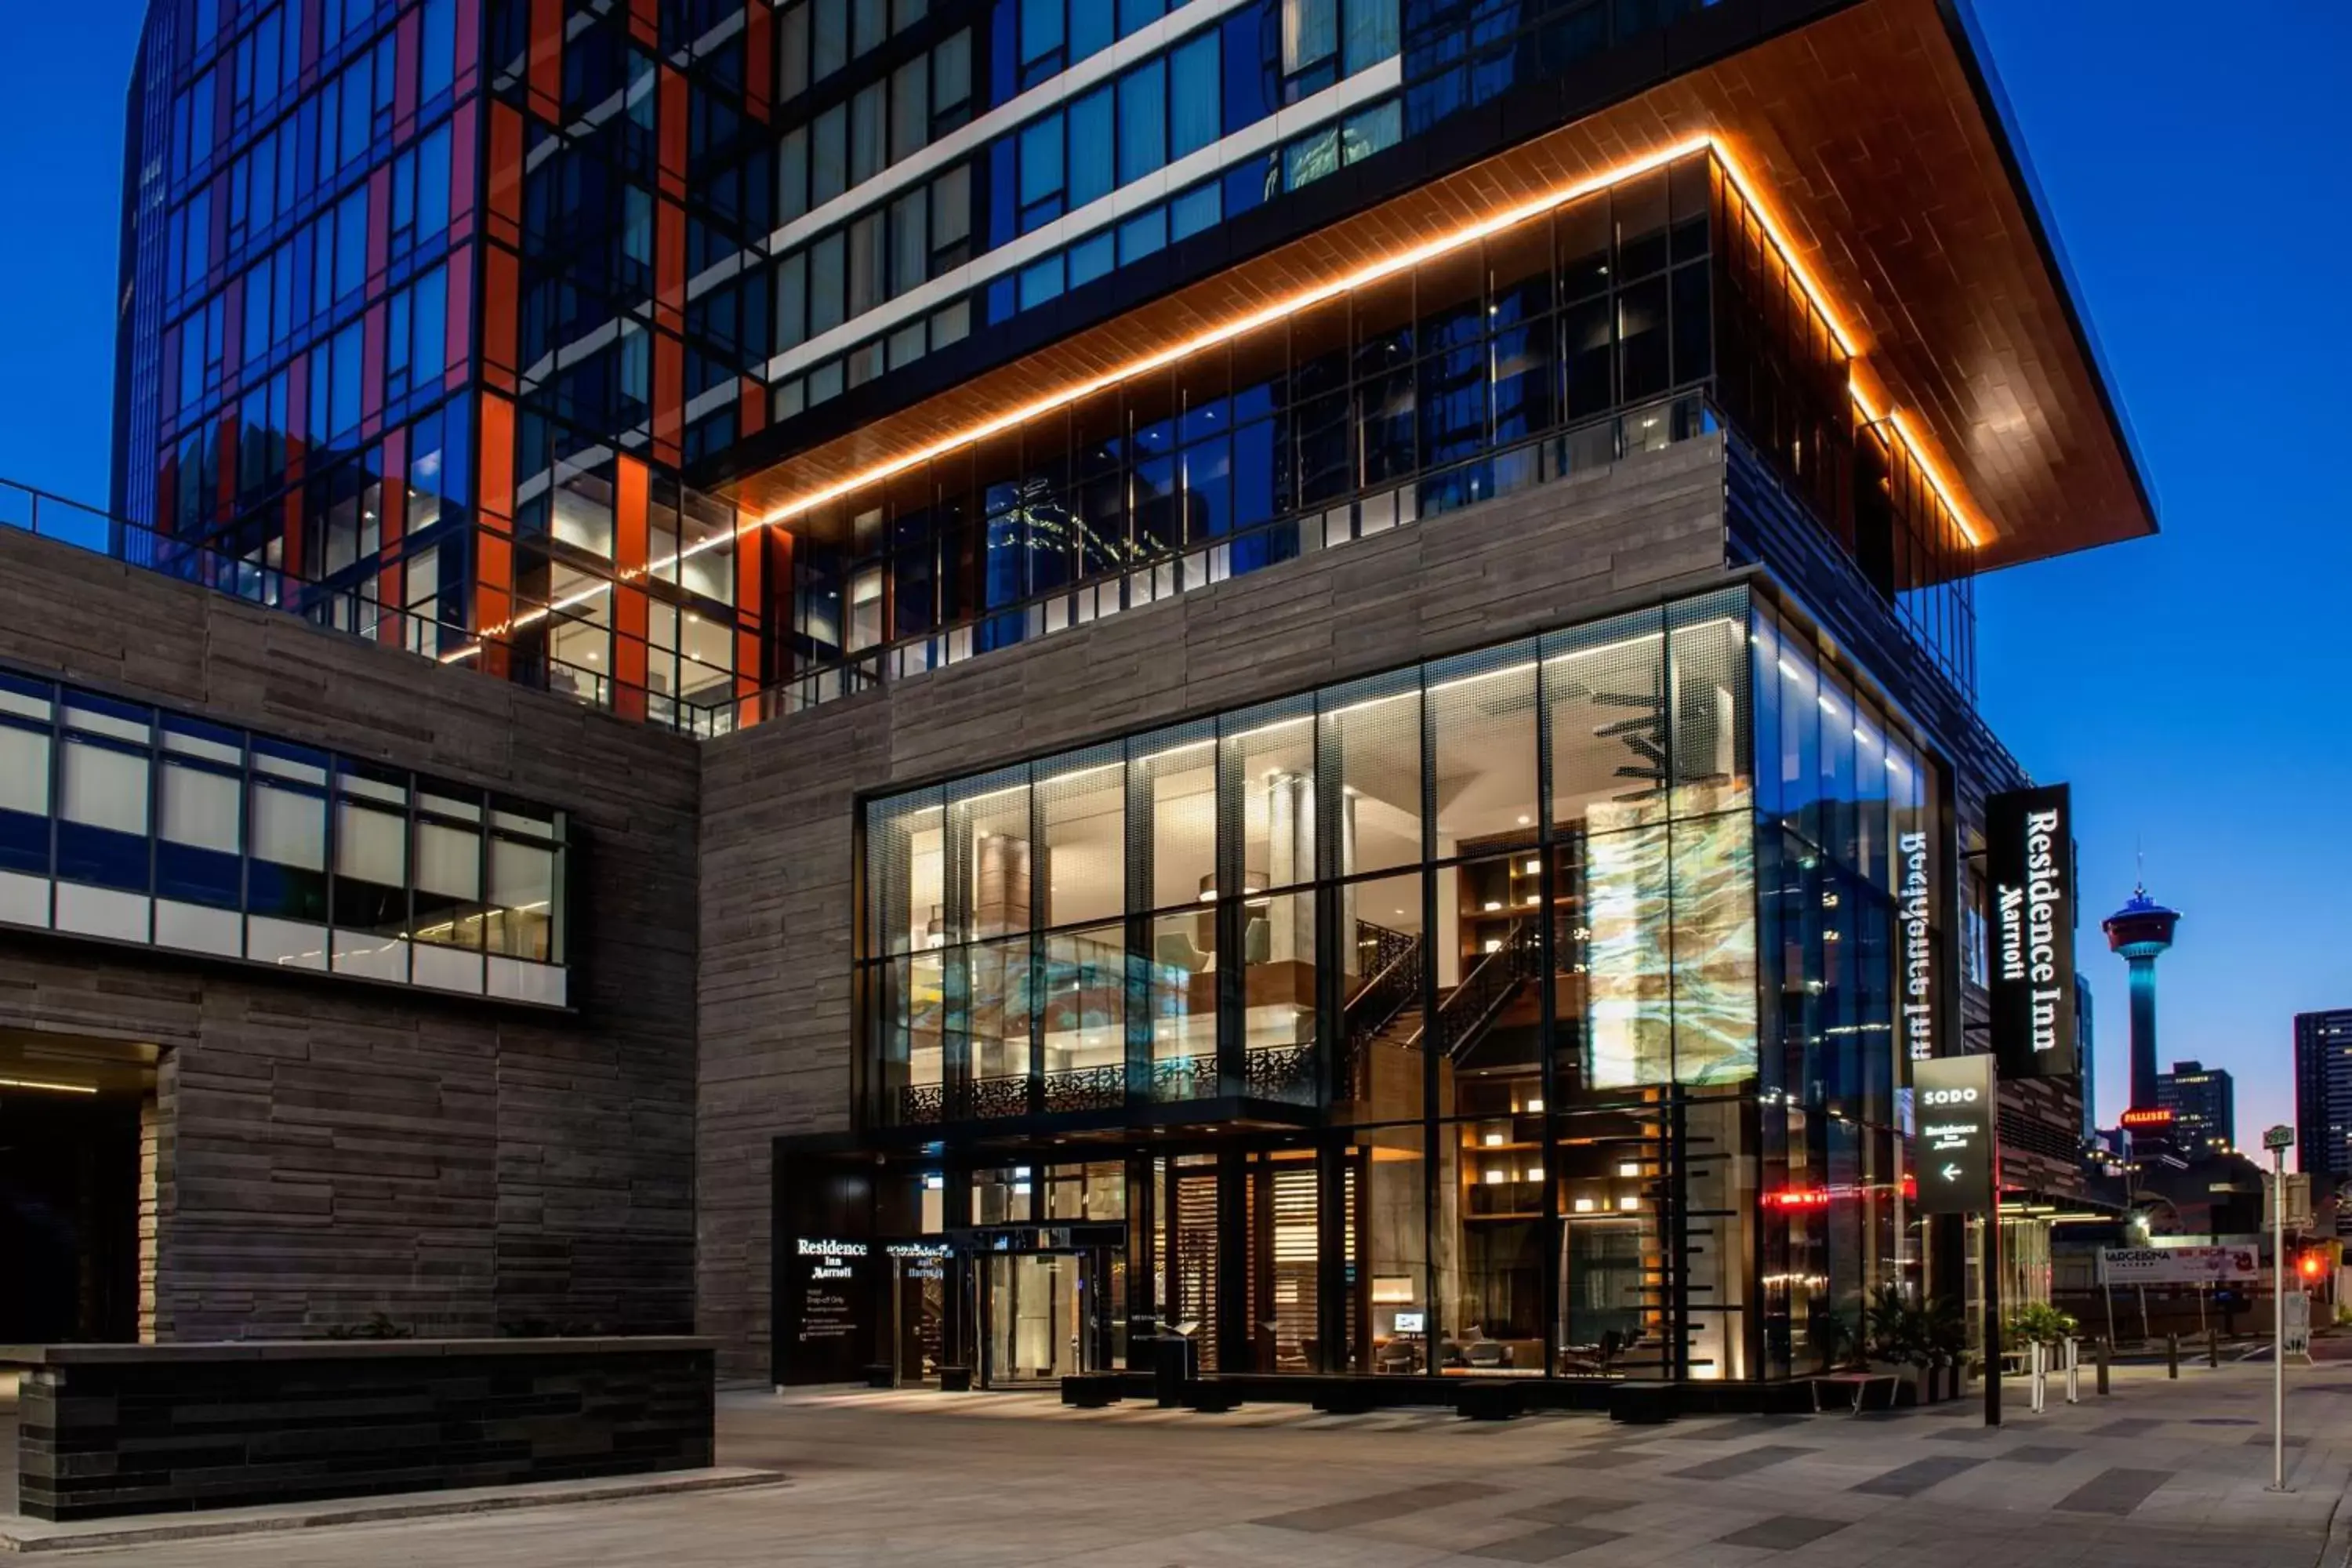 Property Building in Residence Inn by Marriott Calgary Downtown/Beltline District